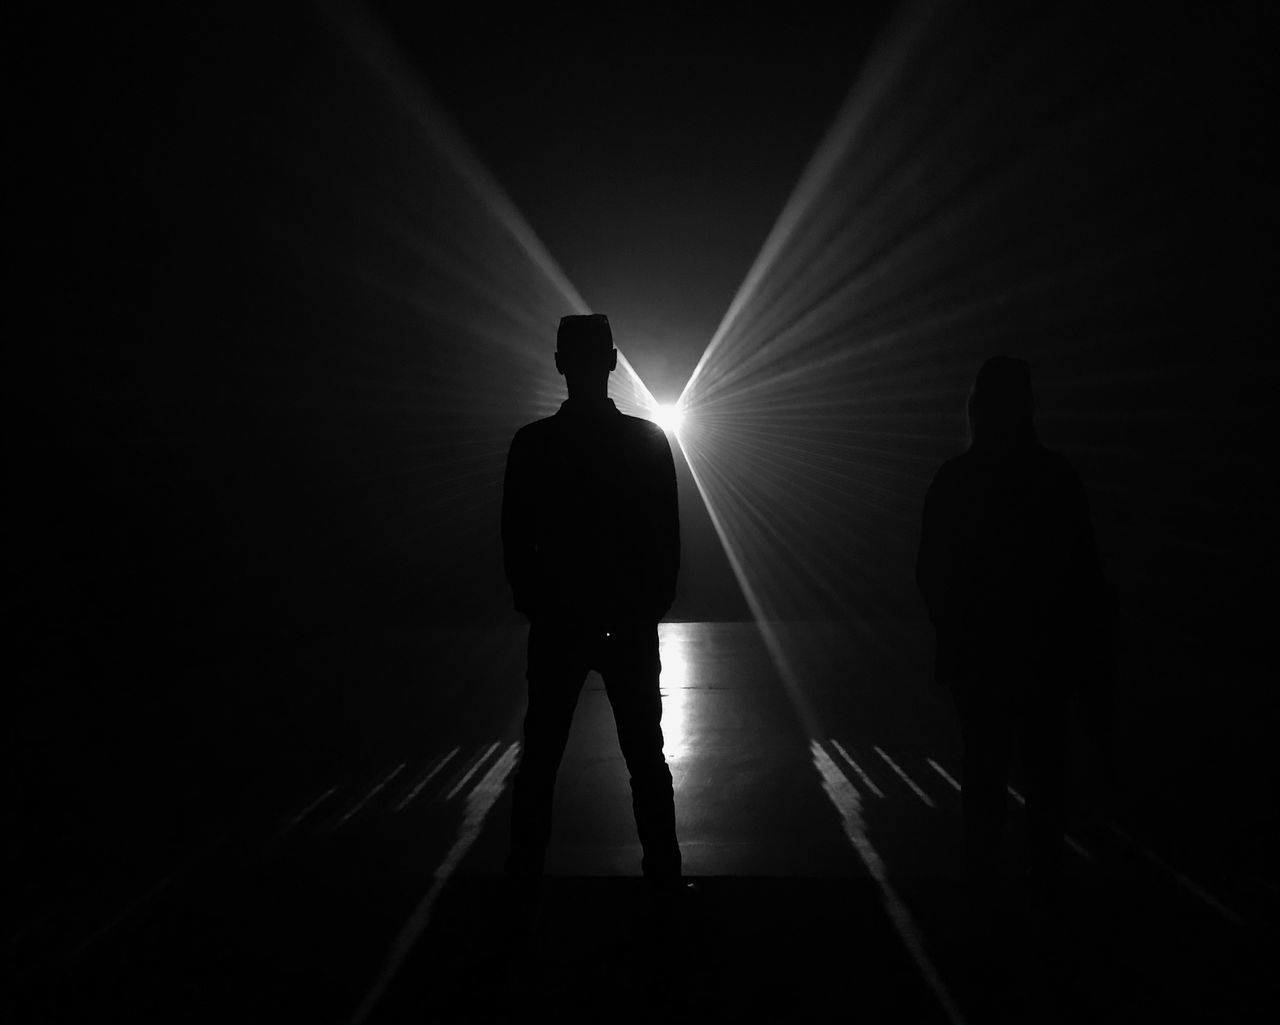 silhouette, men, standing, real people, people, rear view, shadow, full length, illuminated, sunlight, lifestyles, leisure activity, light - natural phenomenon, sunbeam, architecture, indoors, group of people, dark, nature, walking, light at the end of the tunnel, nightlife